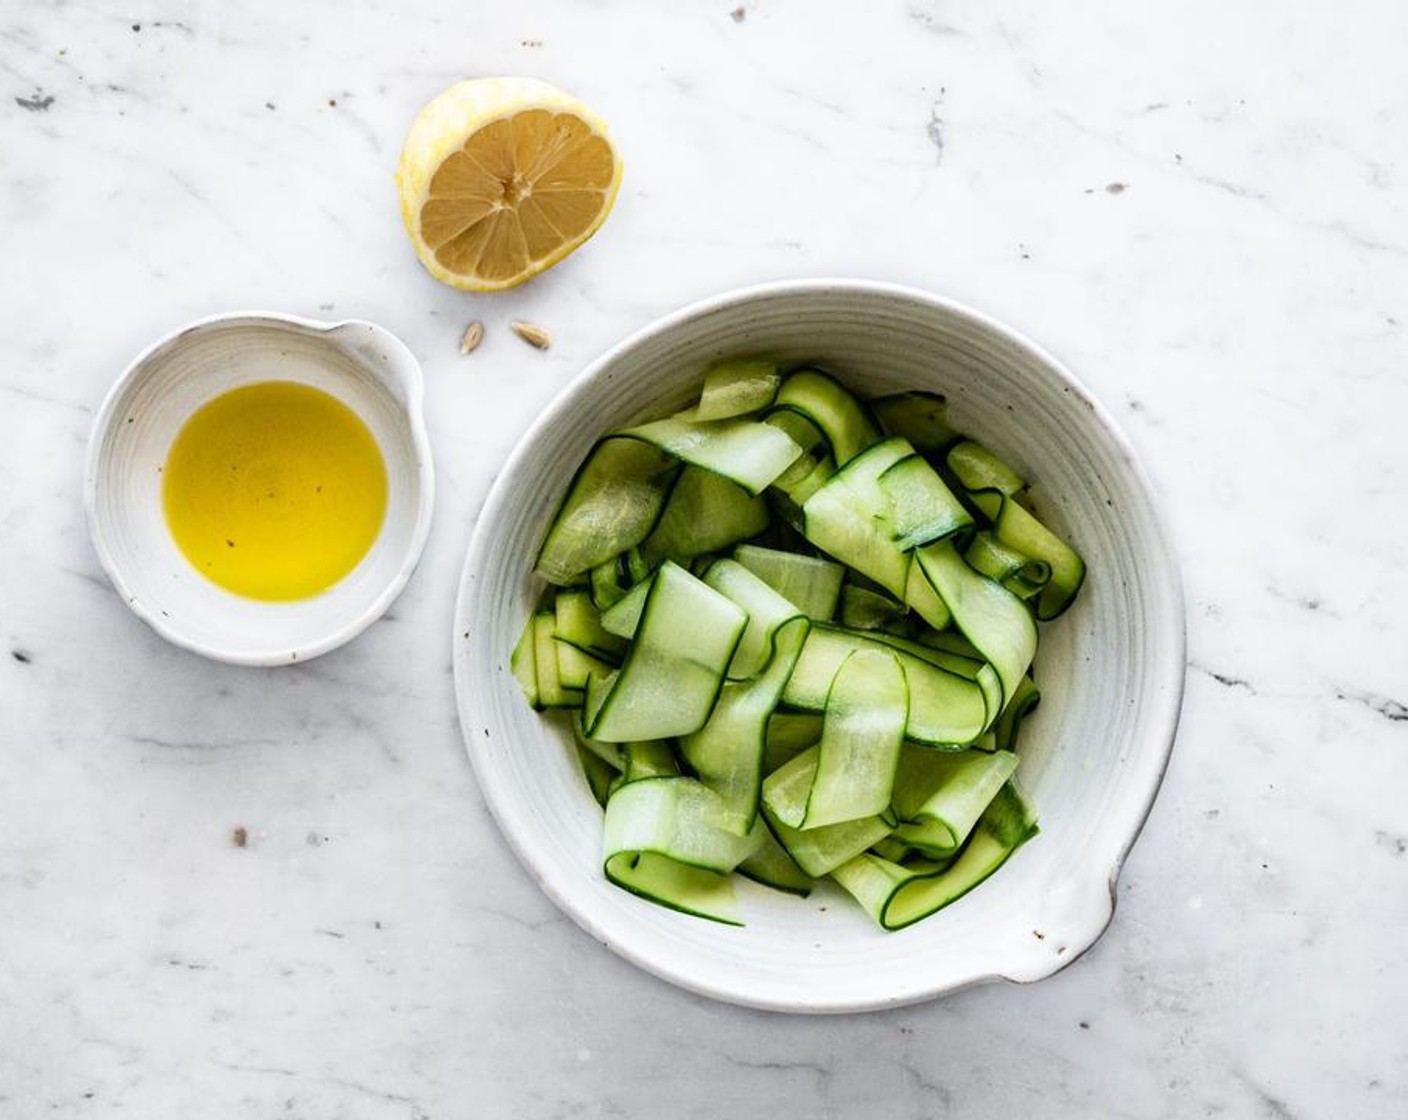 step 2 Add shaved cucumber to a bowl along with the Olive Oil (1 Tbsp) and juice from Lemon (1) - toss to combine and then refrigerate until ready to serve.